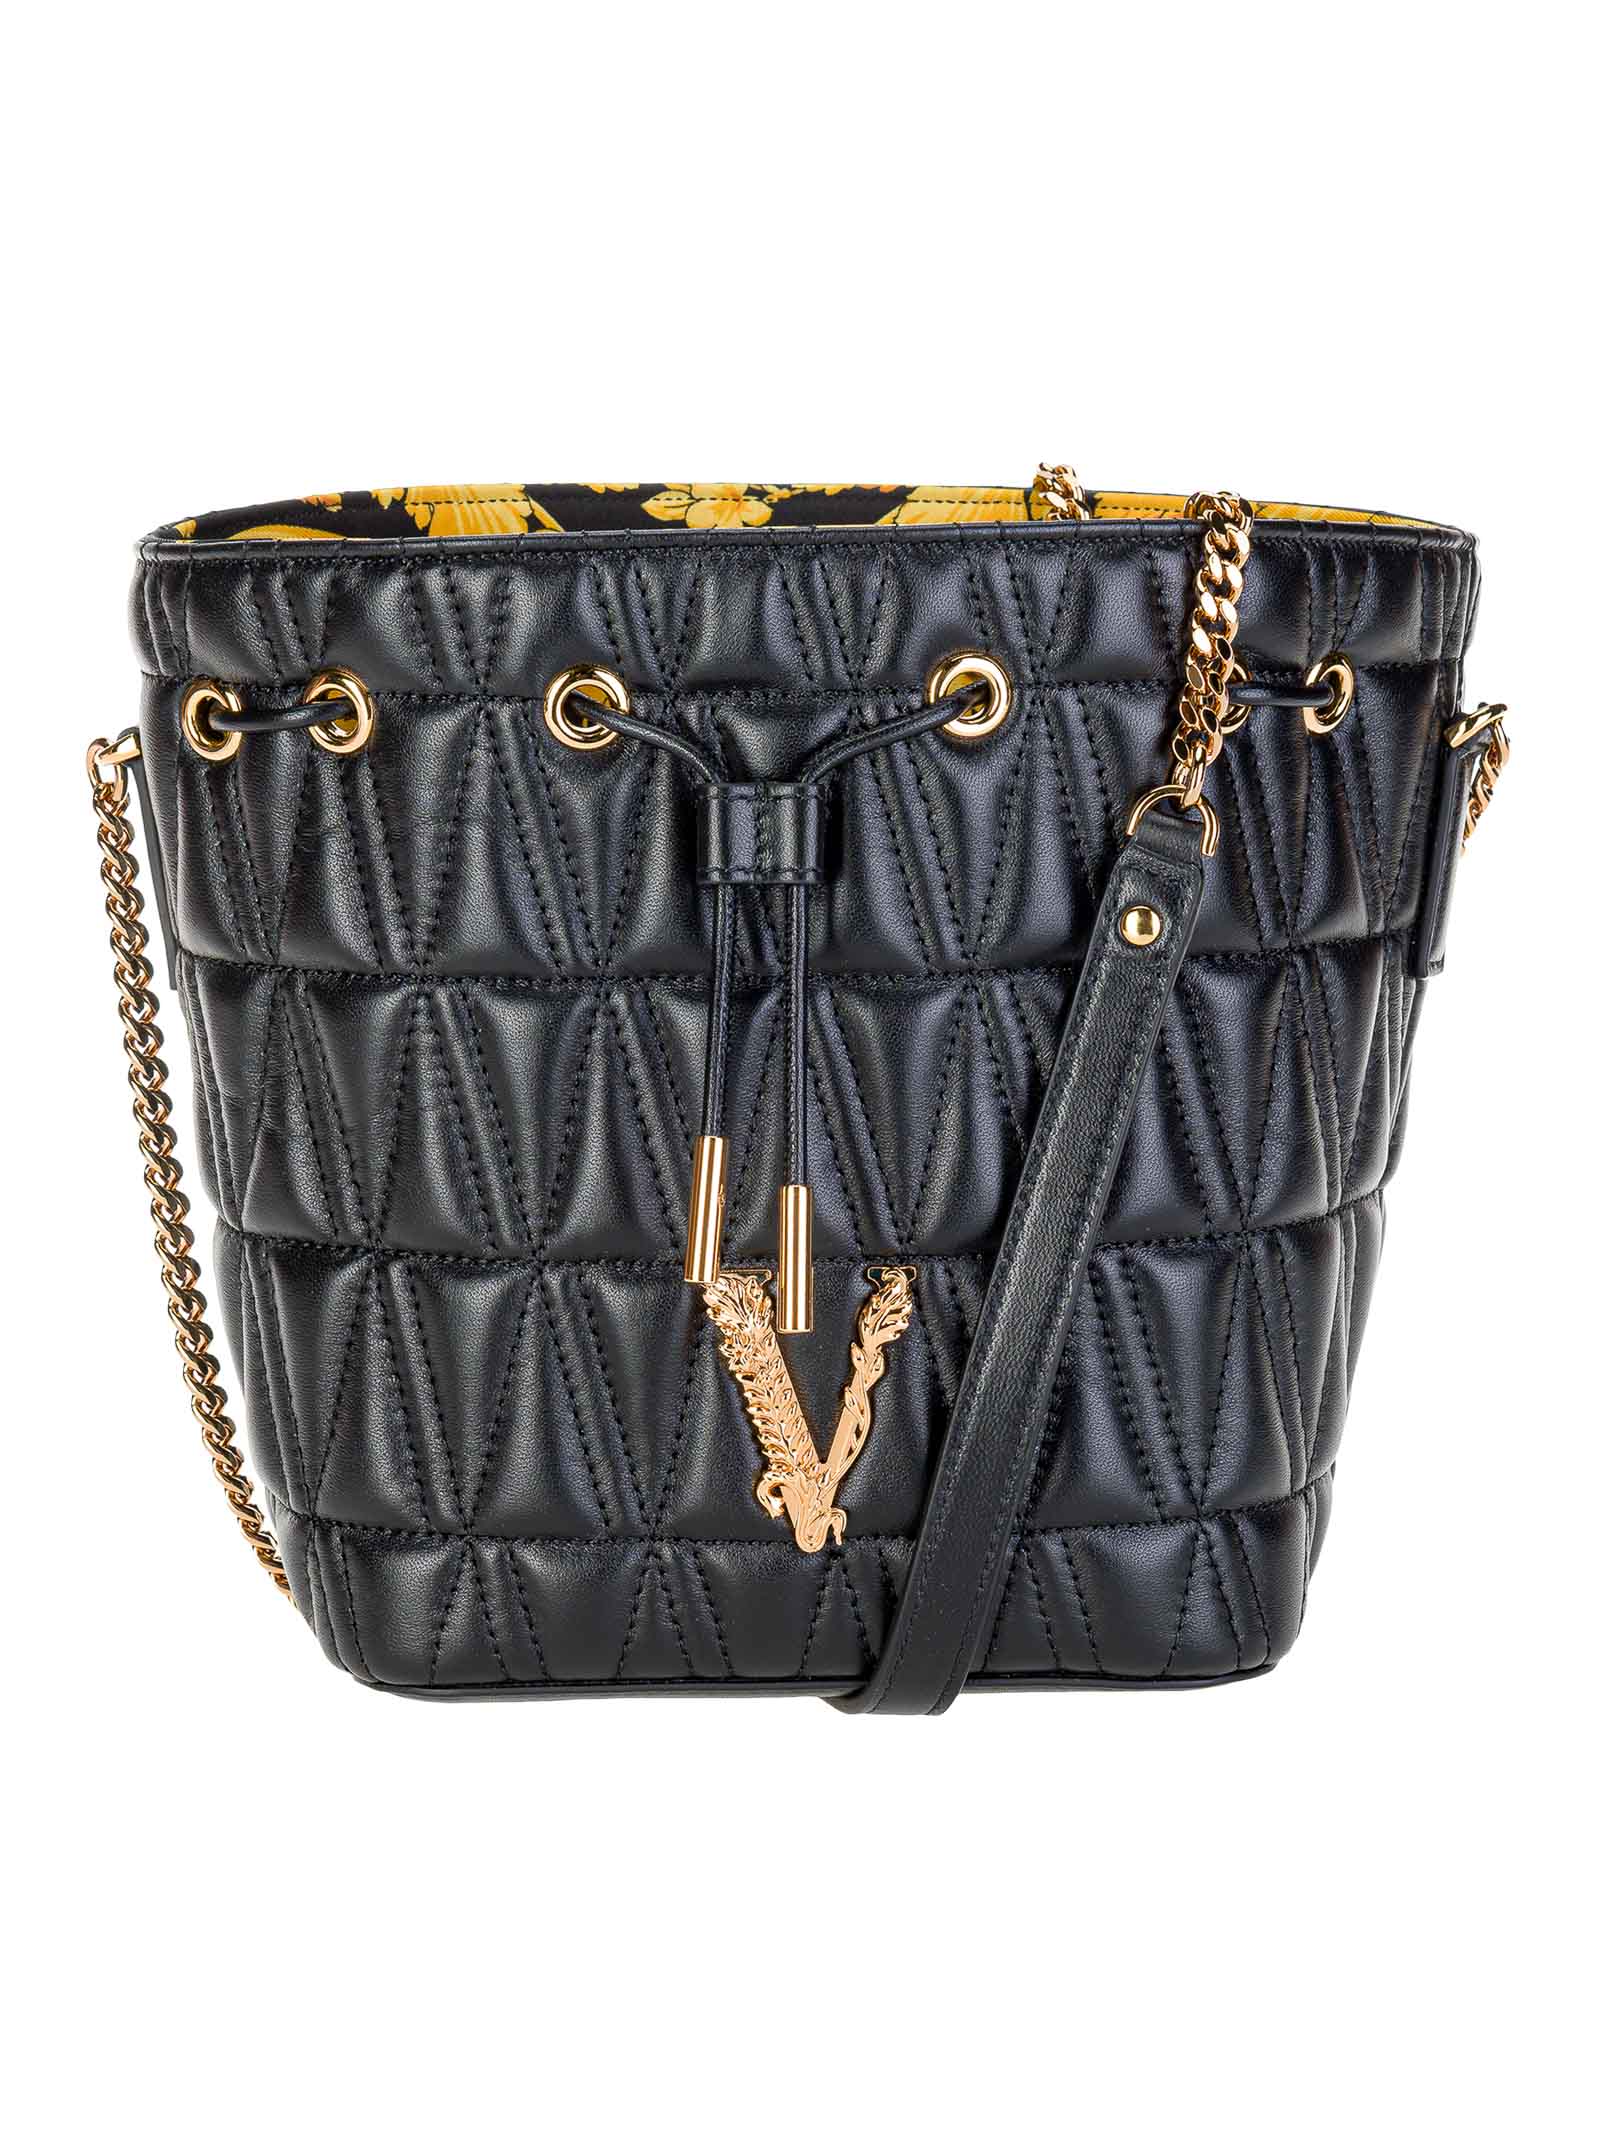 Versace Versus Quilted Leather Crossbody Bag